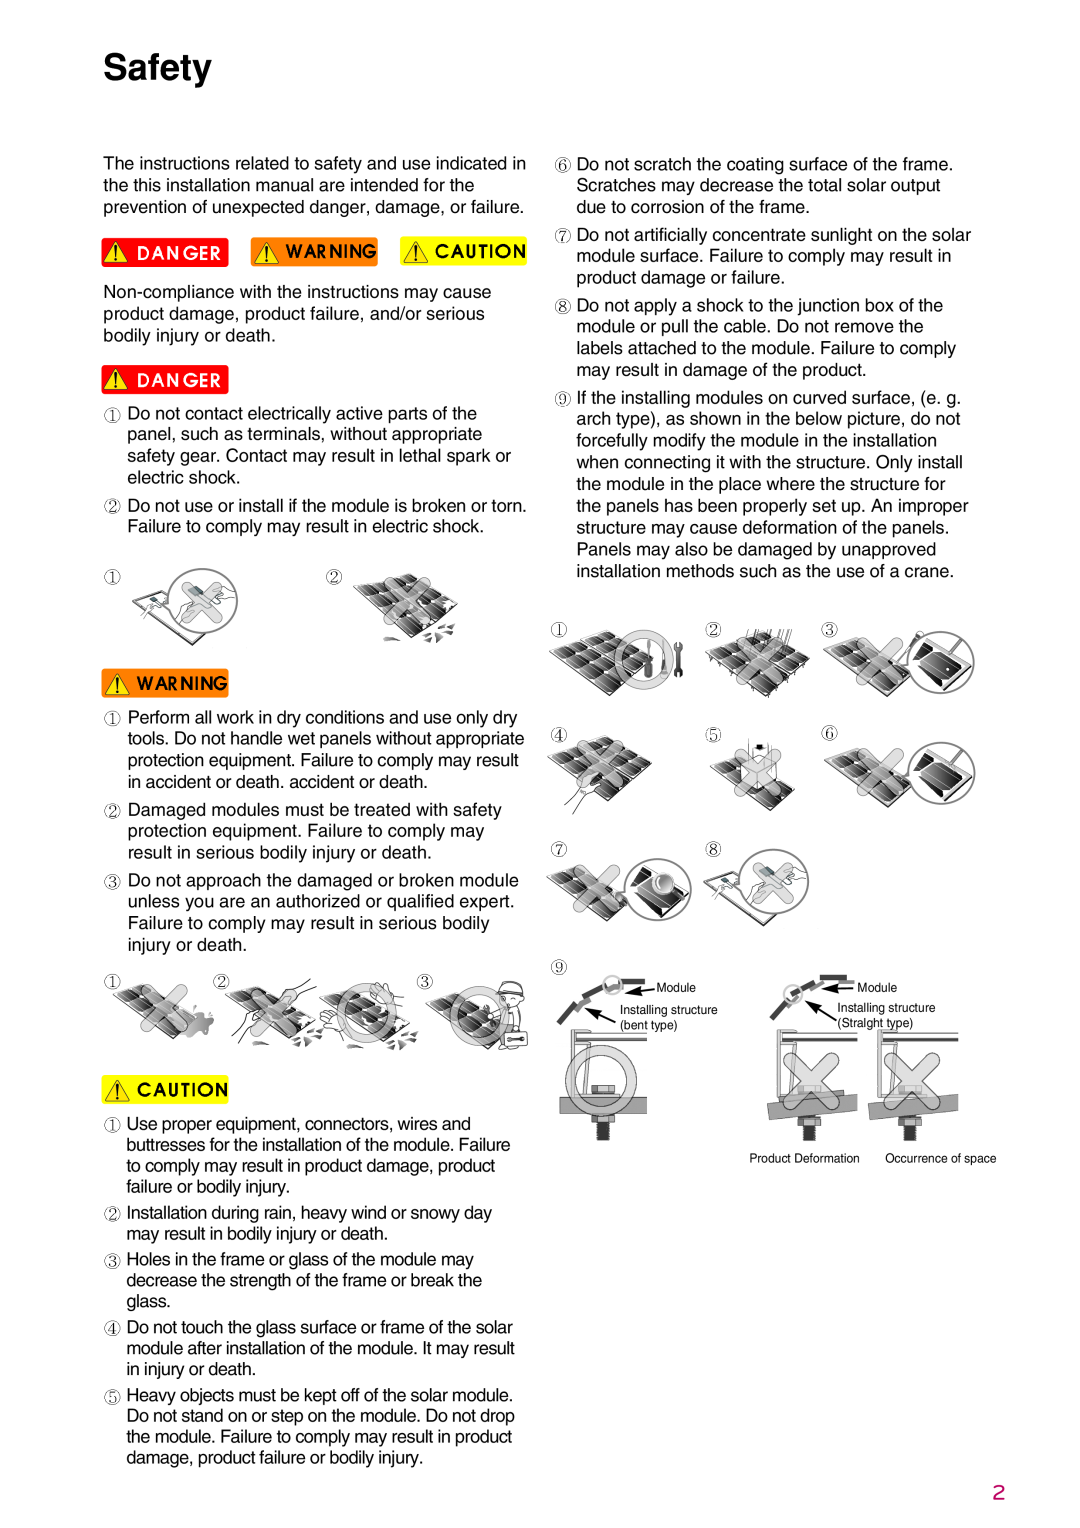 LG Electronics LGXXXN1C(W)-G3 installation instructions Safety, Installing structure, Occurrence of space 